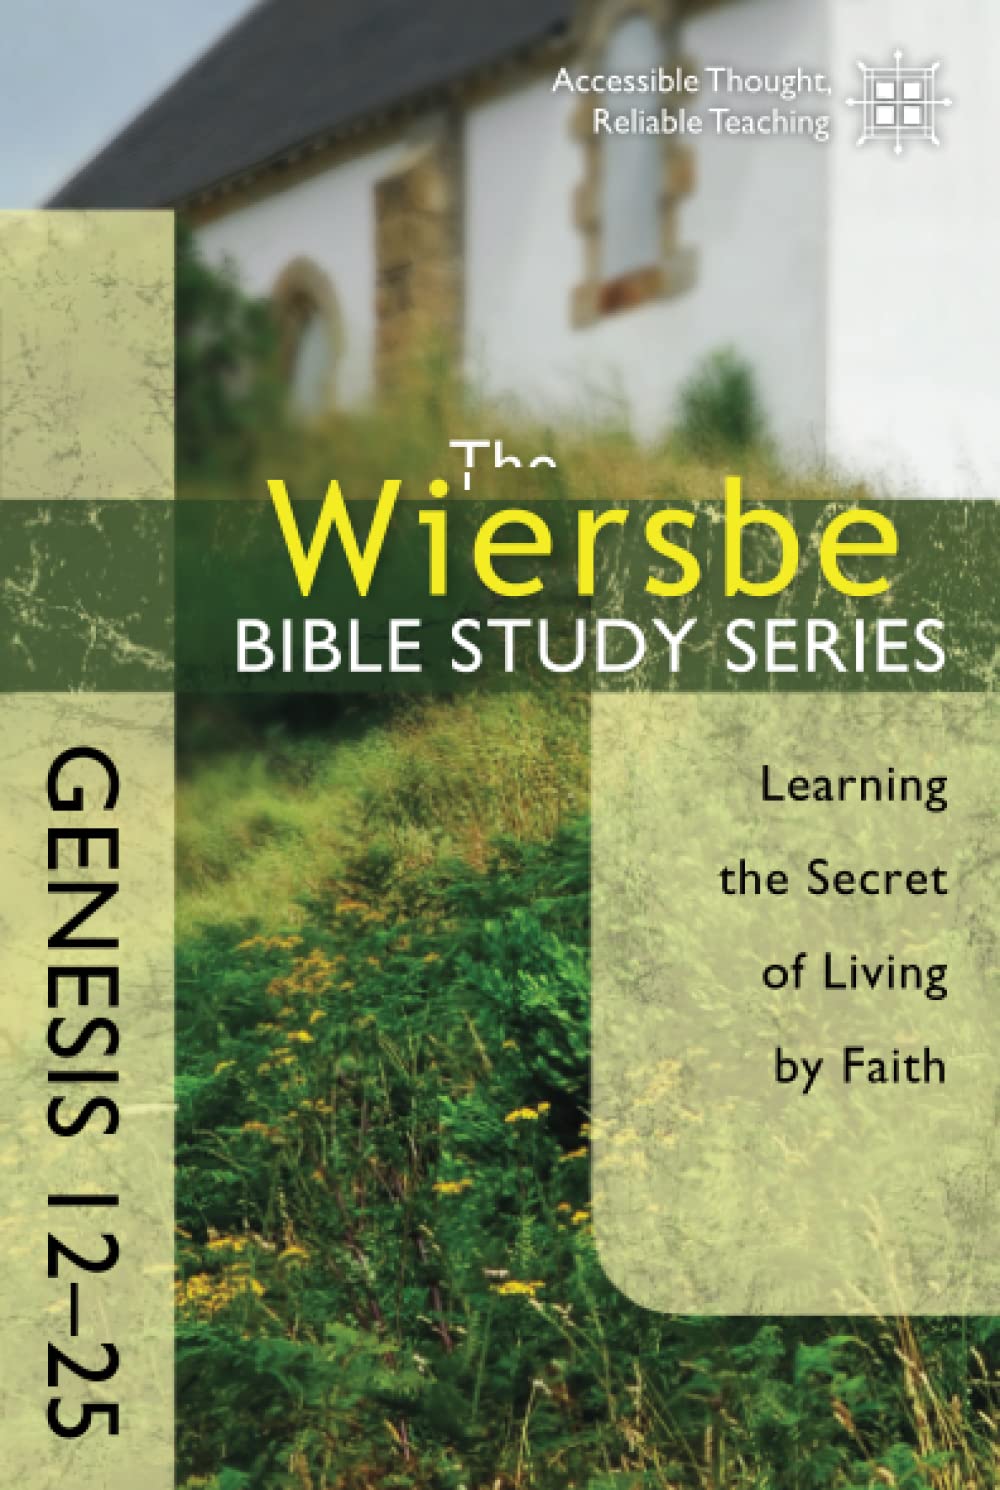 The Wiersbe Bible Study Series: Genesis 12-25: Learning the Secret of Living by Faith